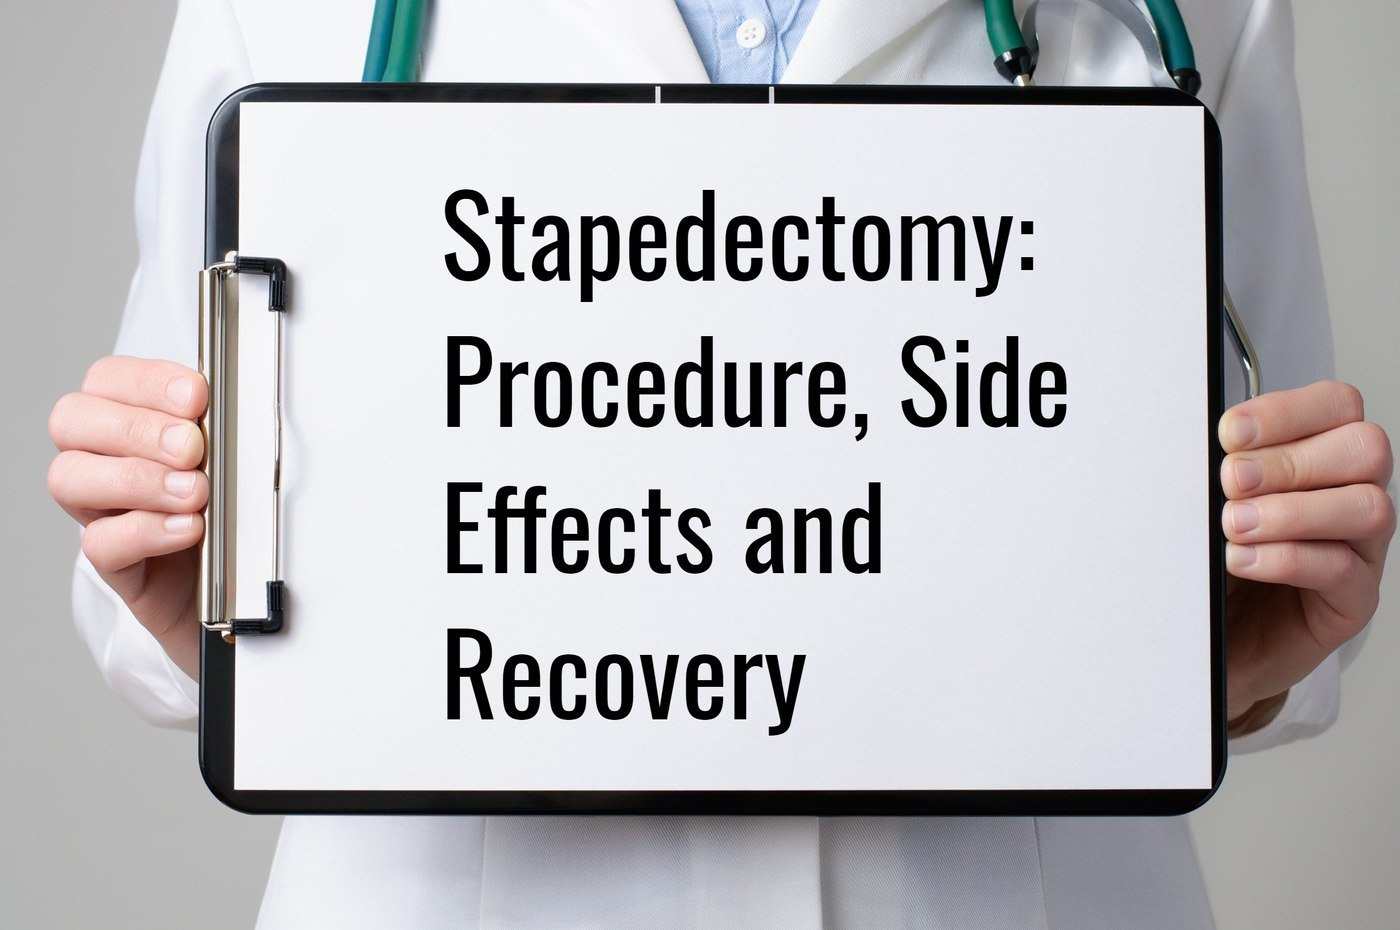 Stapedectomy procedure side effects and recovery houston ent